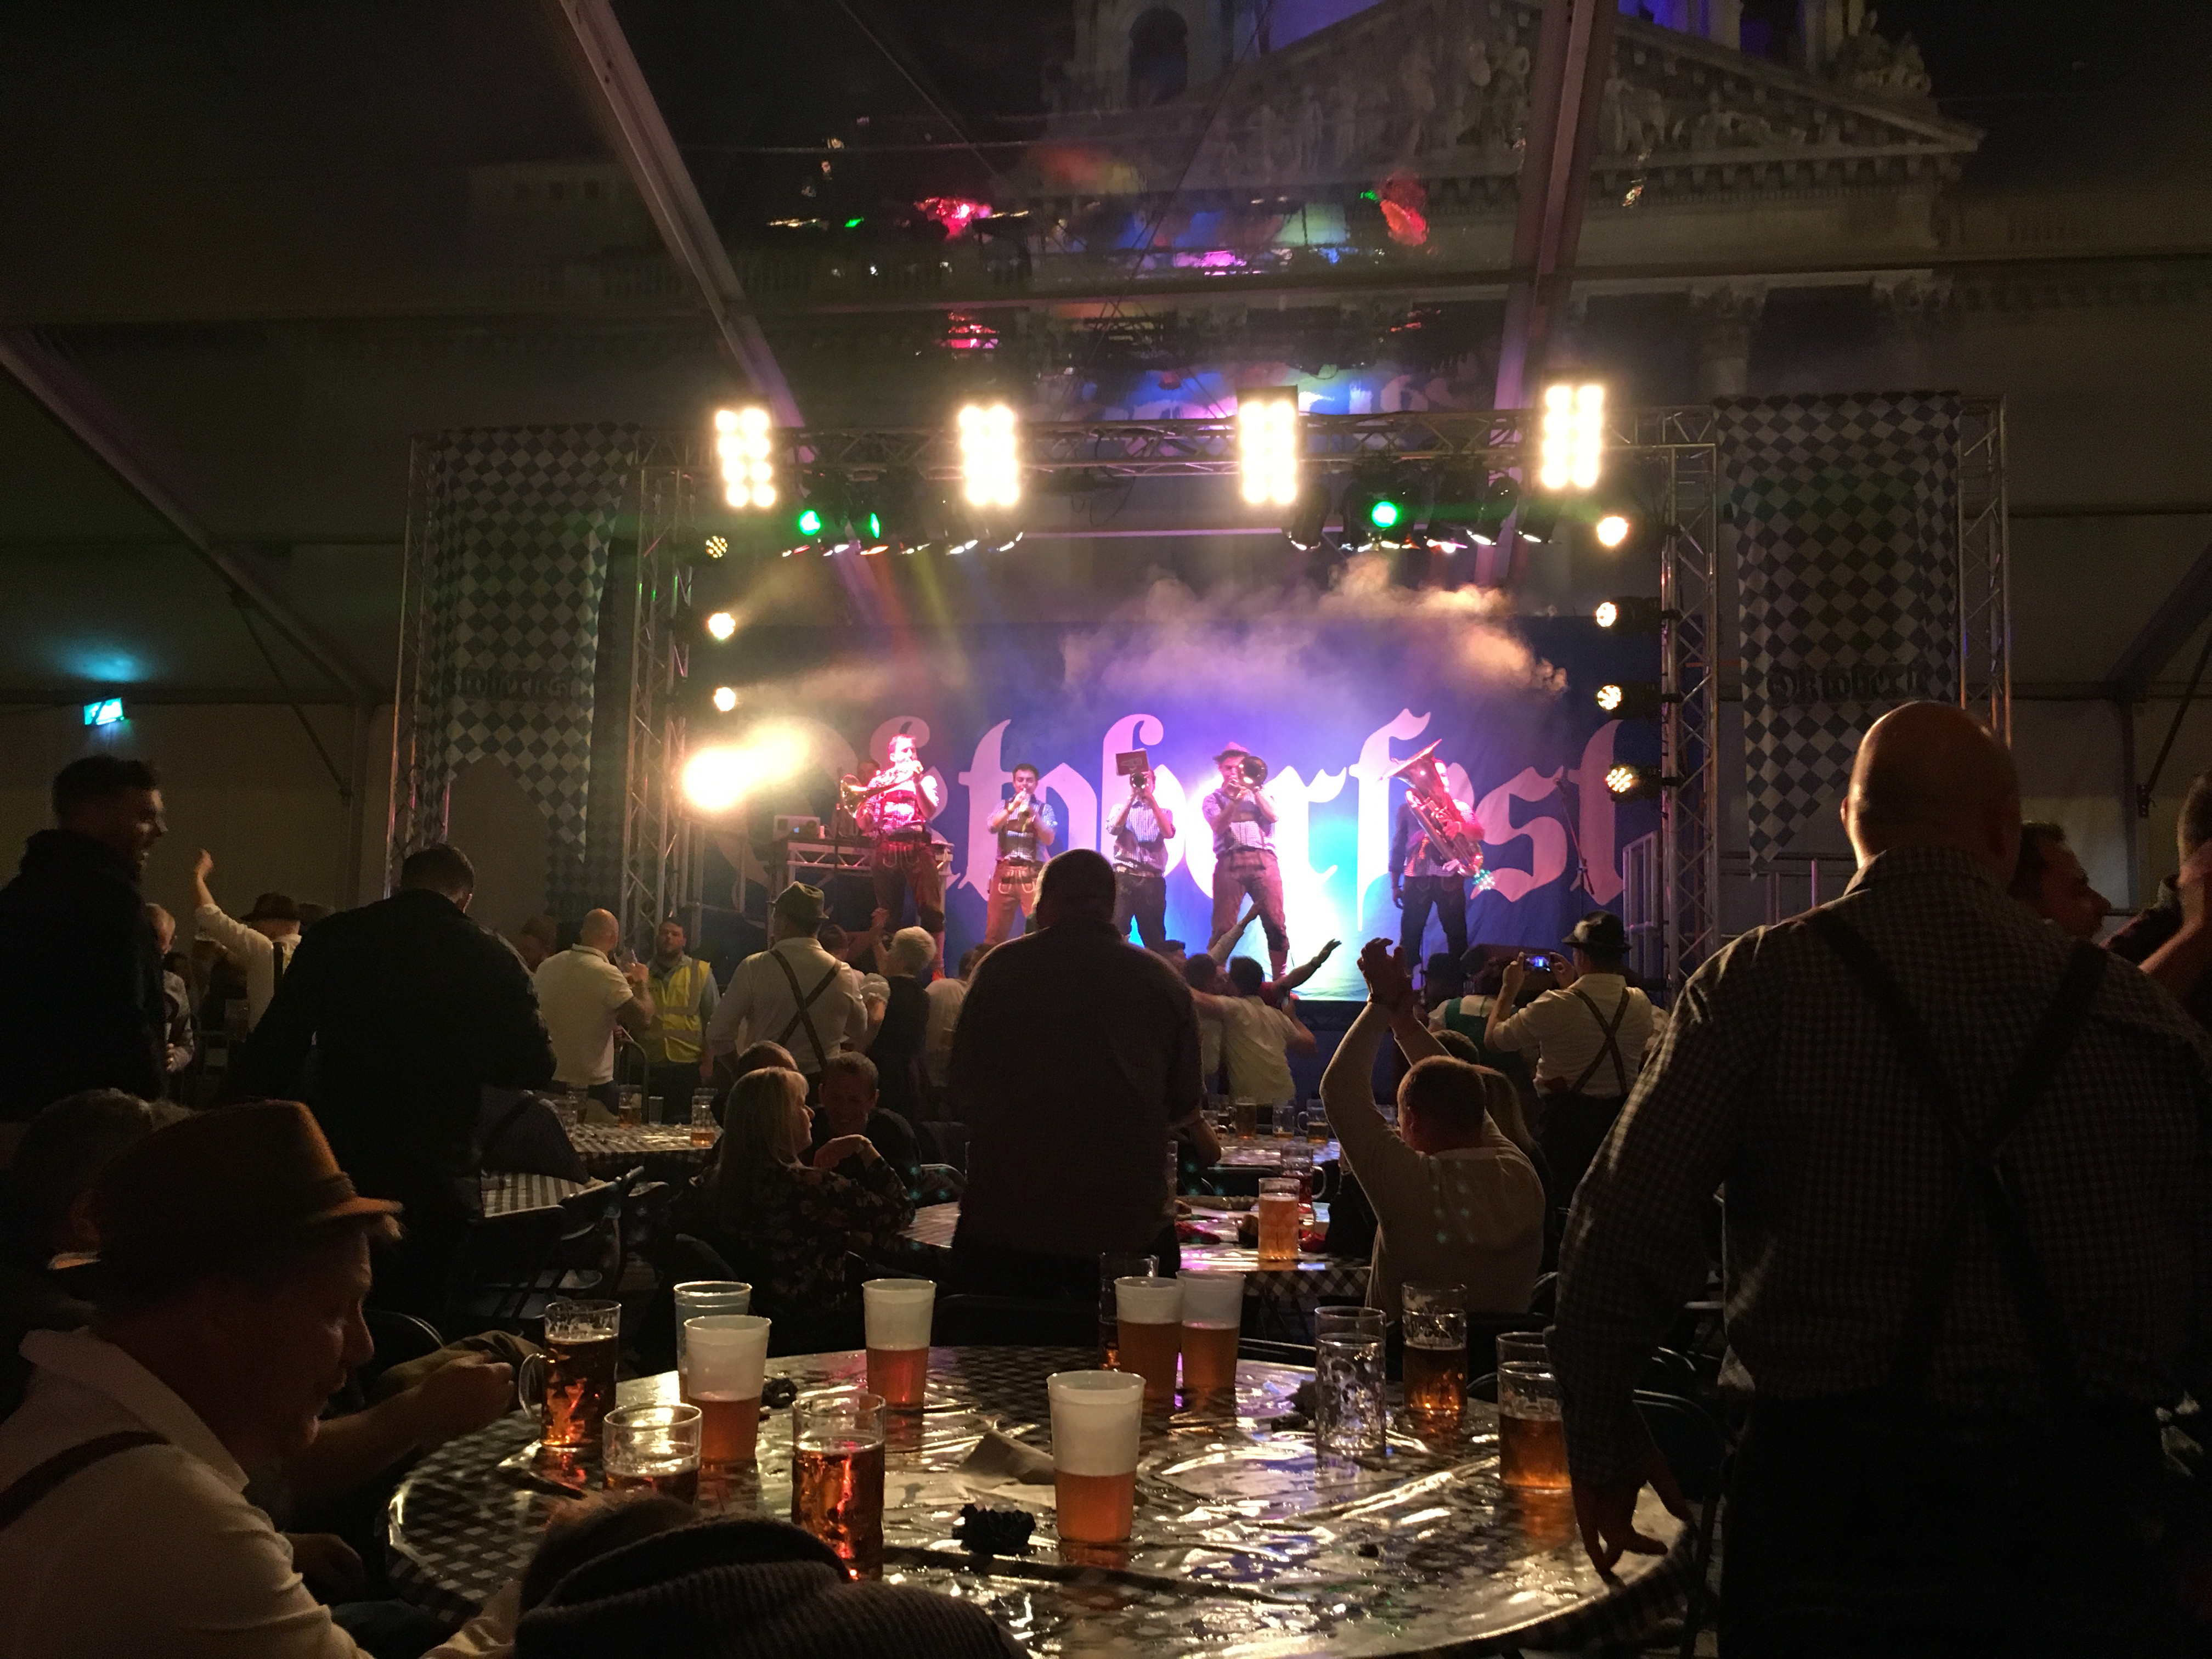 Oompah band on stage with blue and white background spelling out Oktoberfest. The stage is surrounded by lights. In front of the stage is several tables filled with various glasses of beer. Several people are stood up singing and dancing.